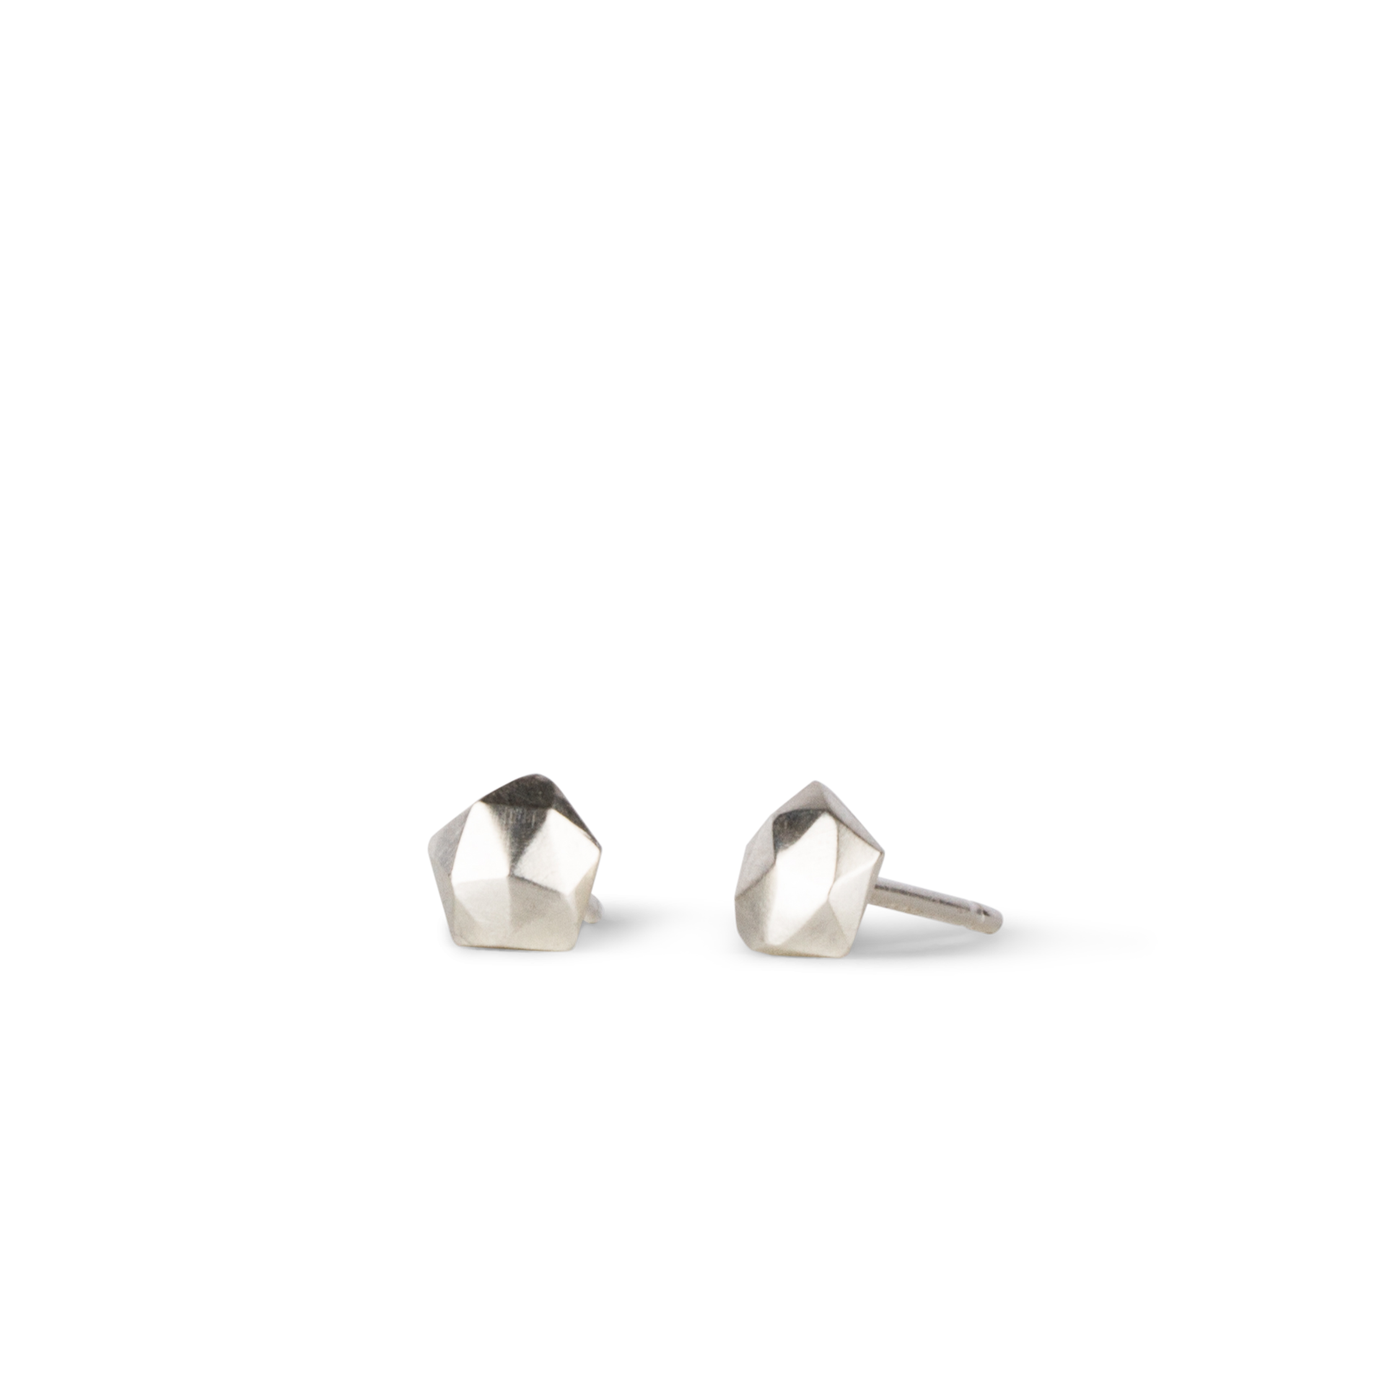 sterling silver micro size geometric faceted stud earrings by Corey Egan on a white background